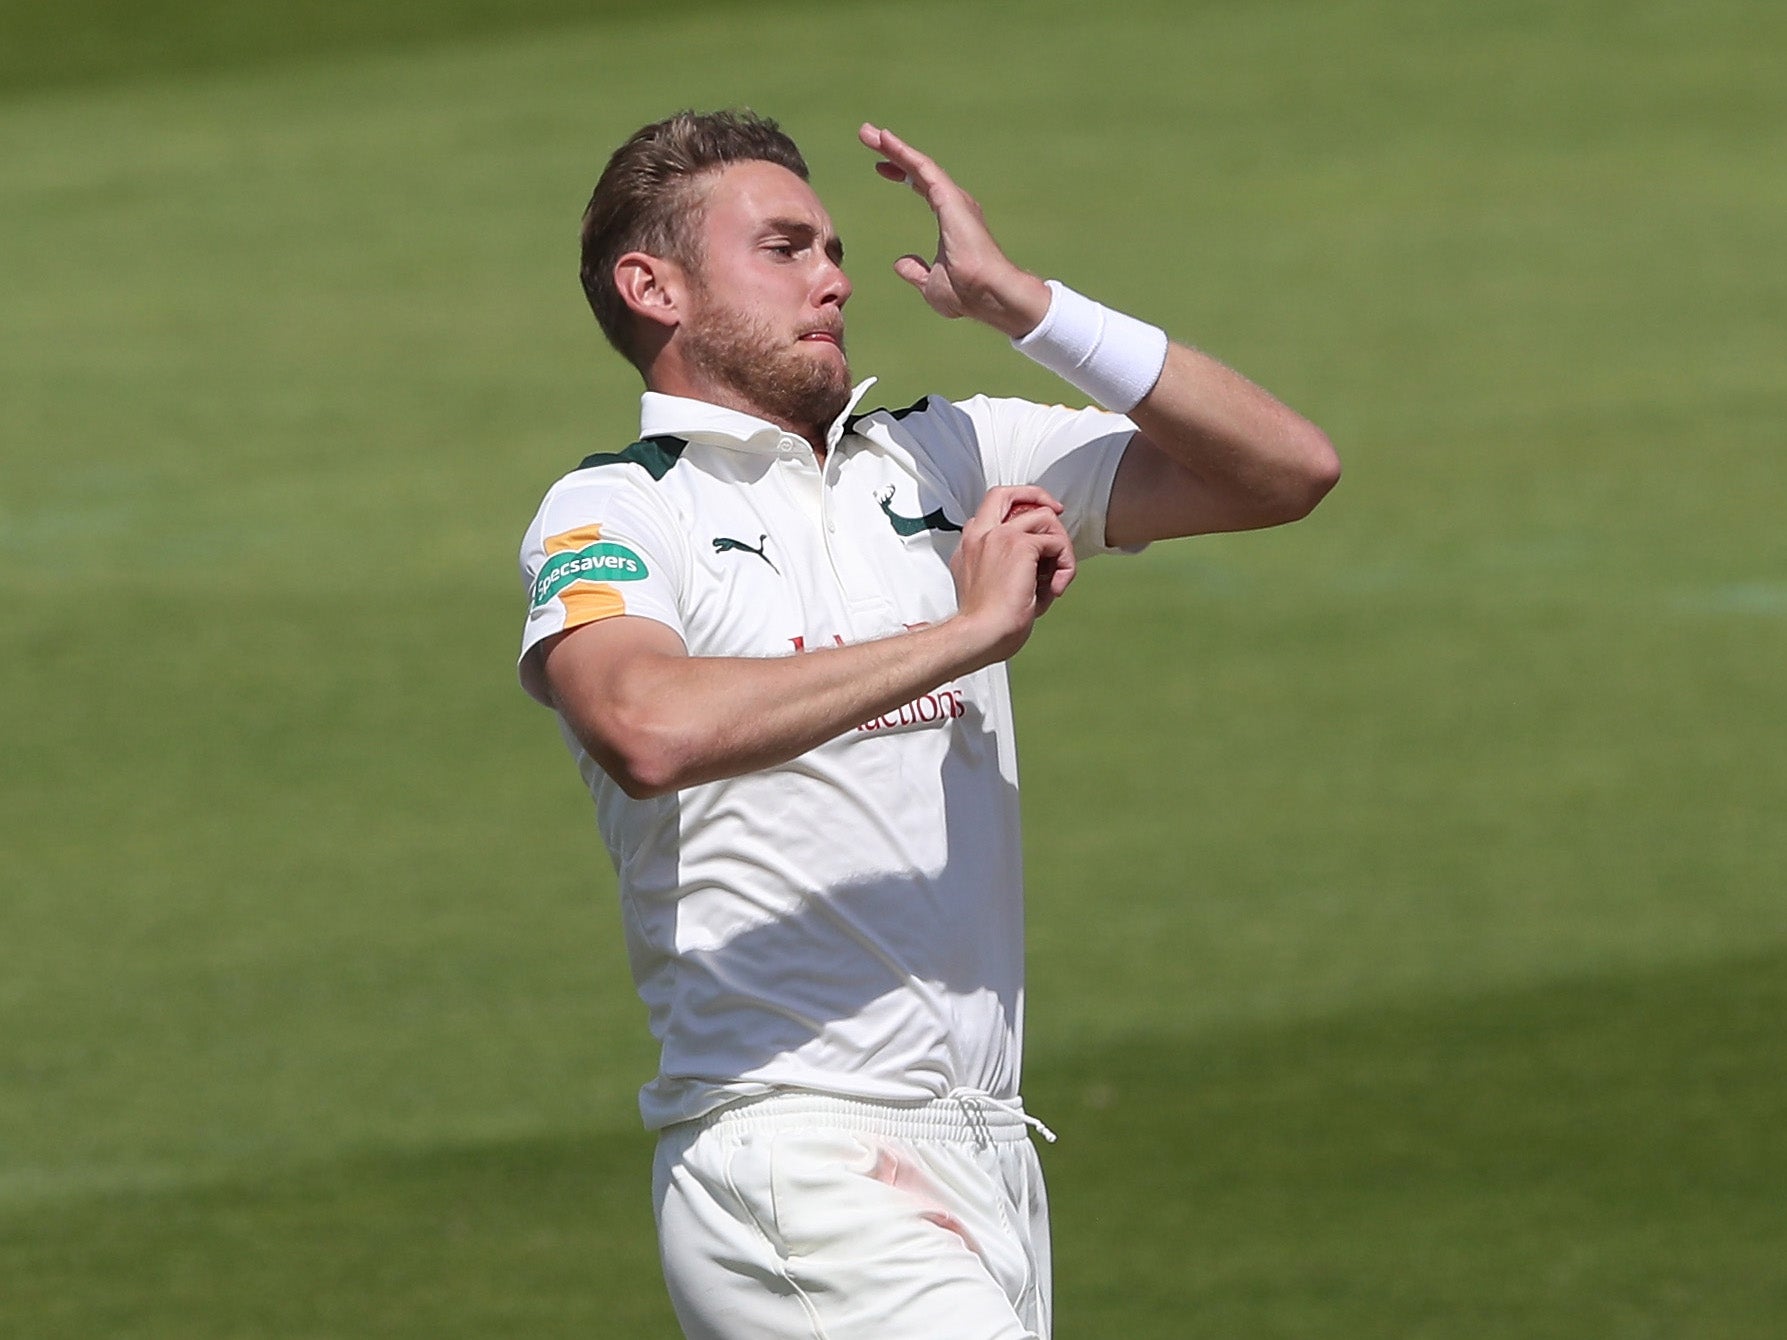 Broad took the first wicket of the new season